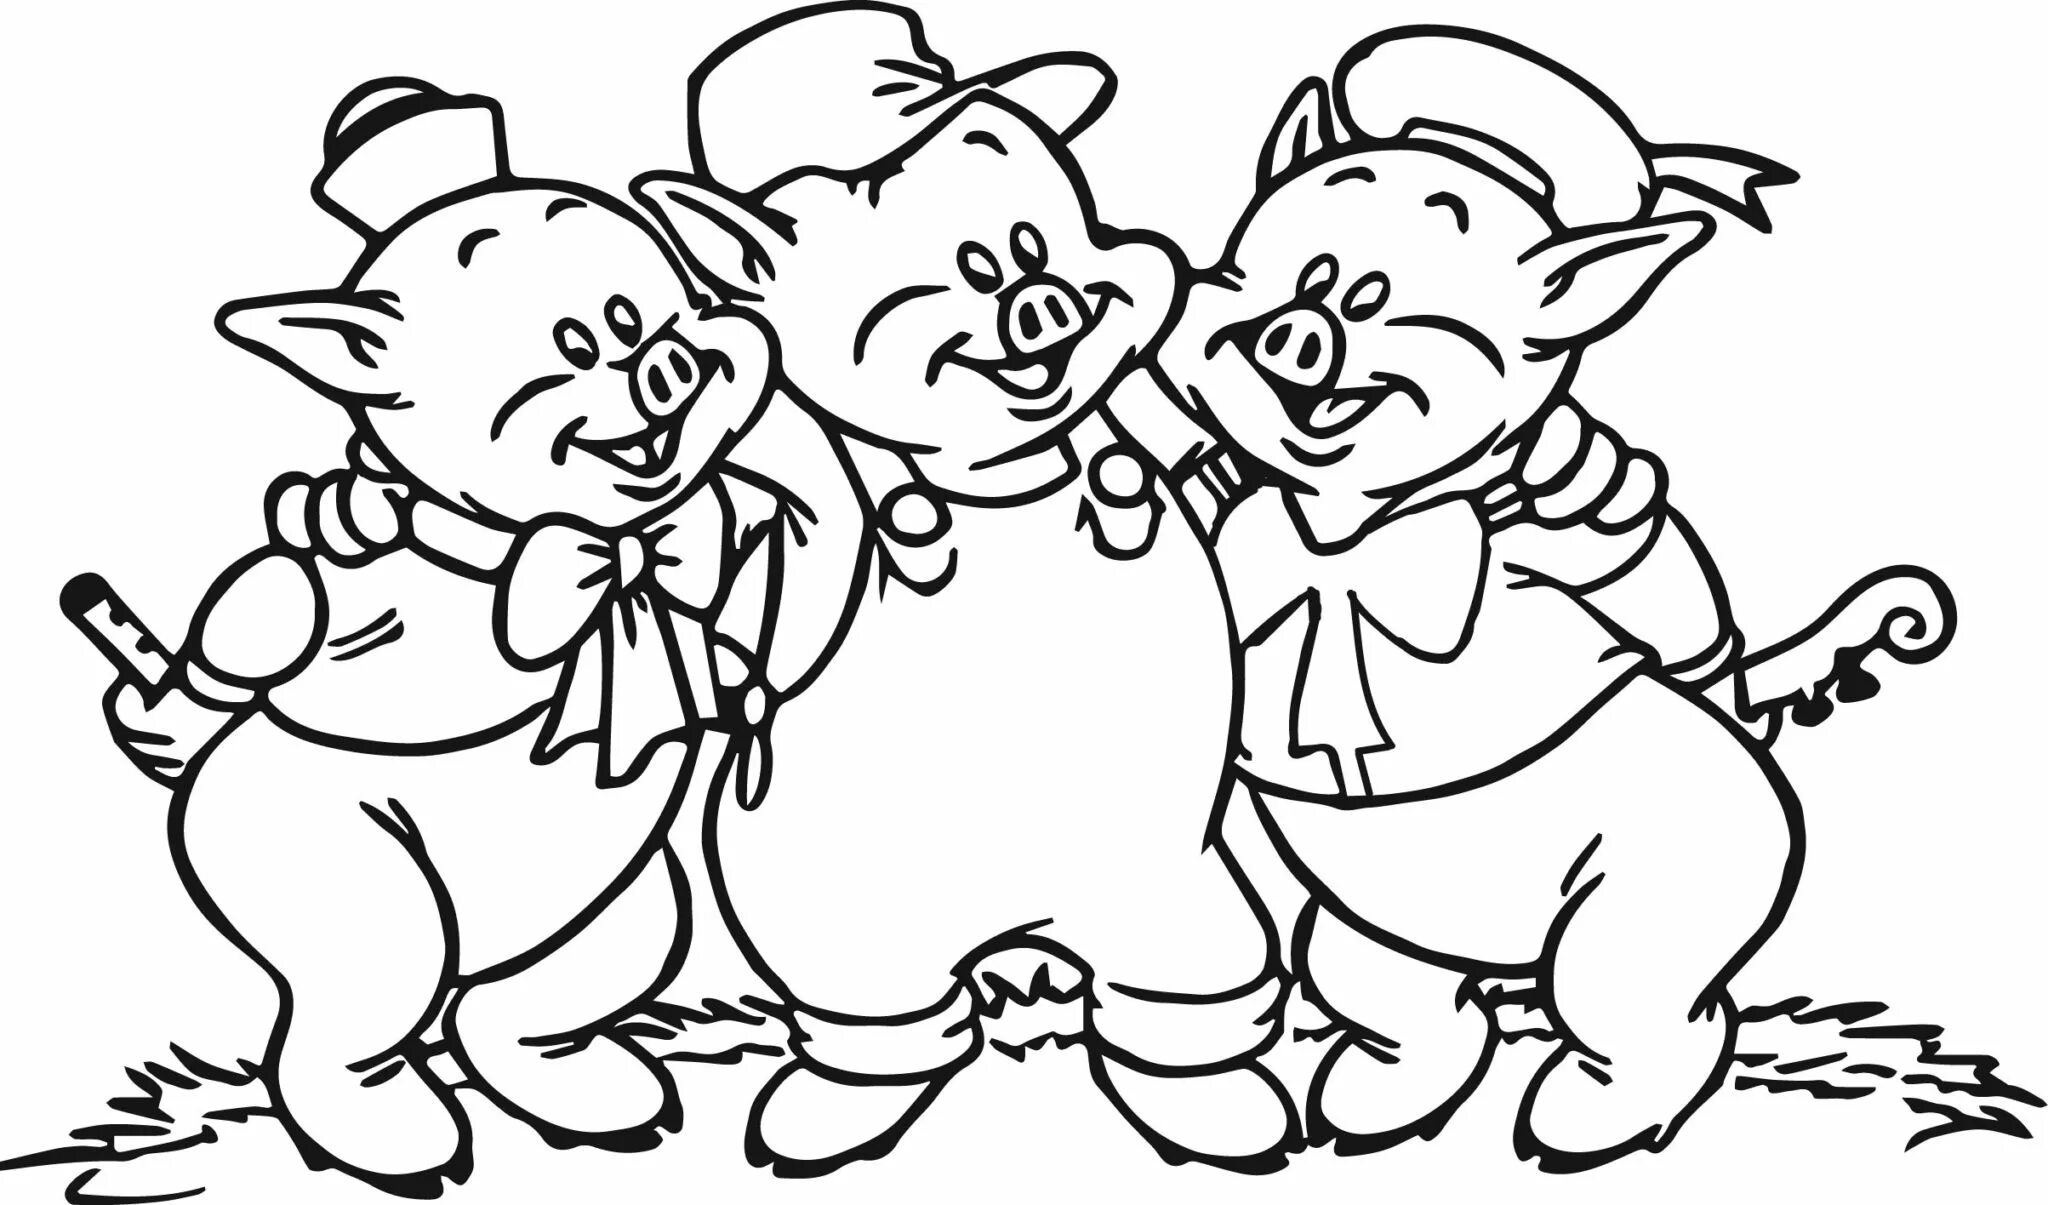 Three little pigs for children 3 4 years old #3